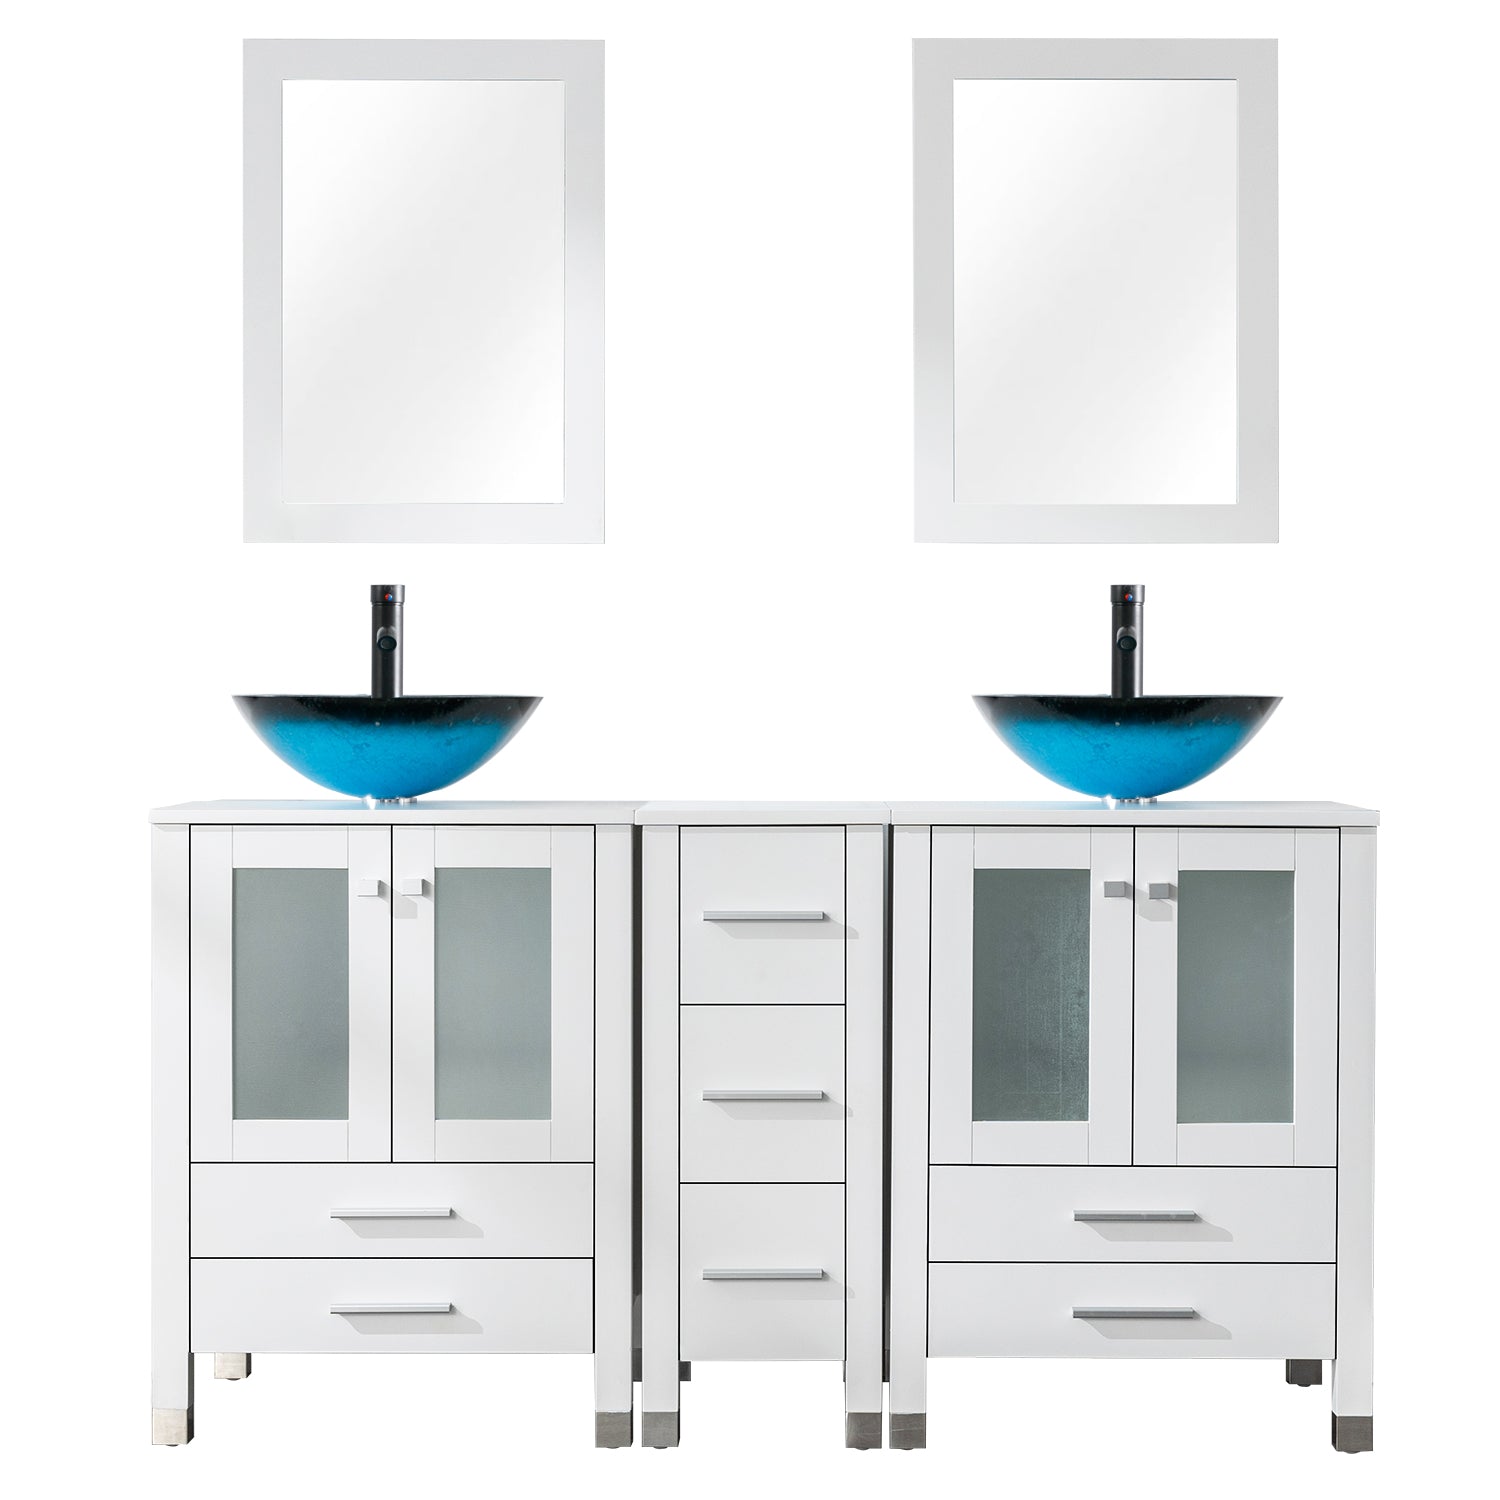 Eclife 60" Double Bathroom Vanity Sink Combos, Solid Wood Construction and Painted Frame - White